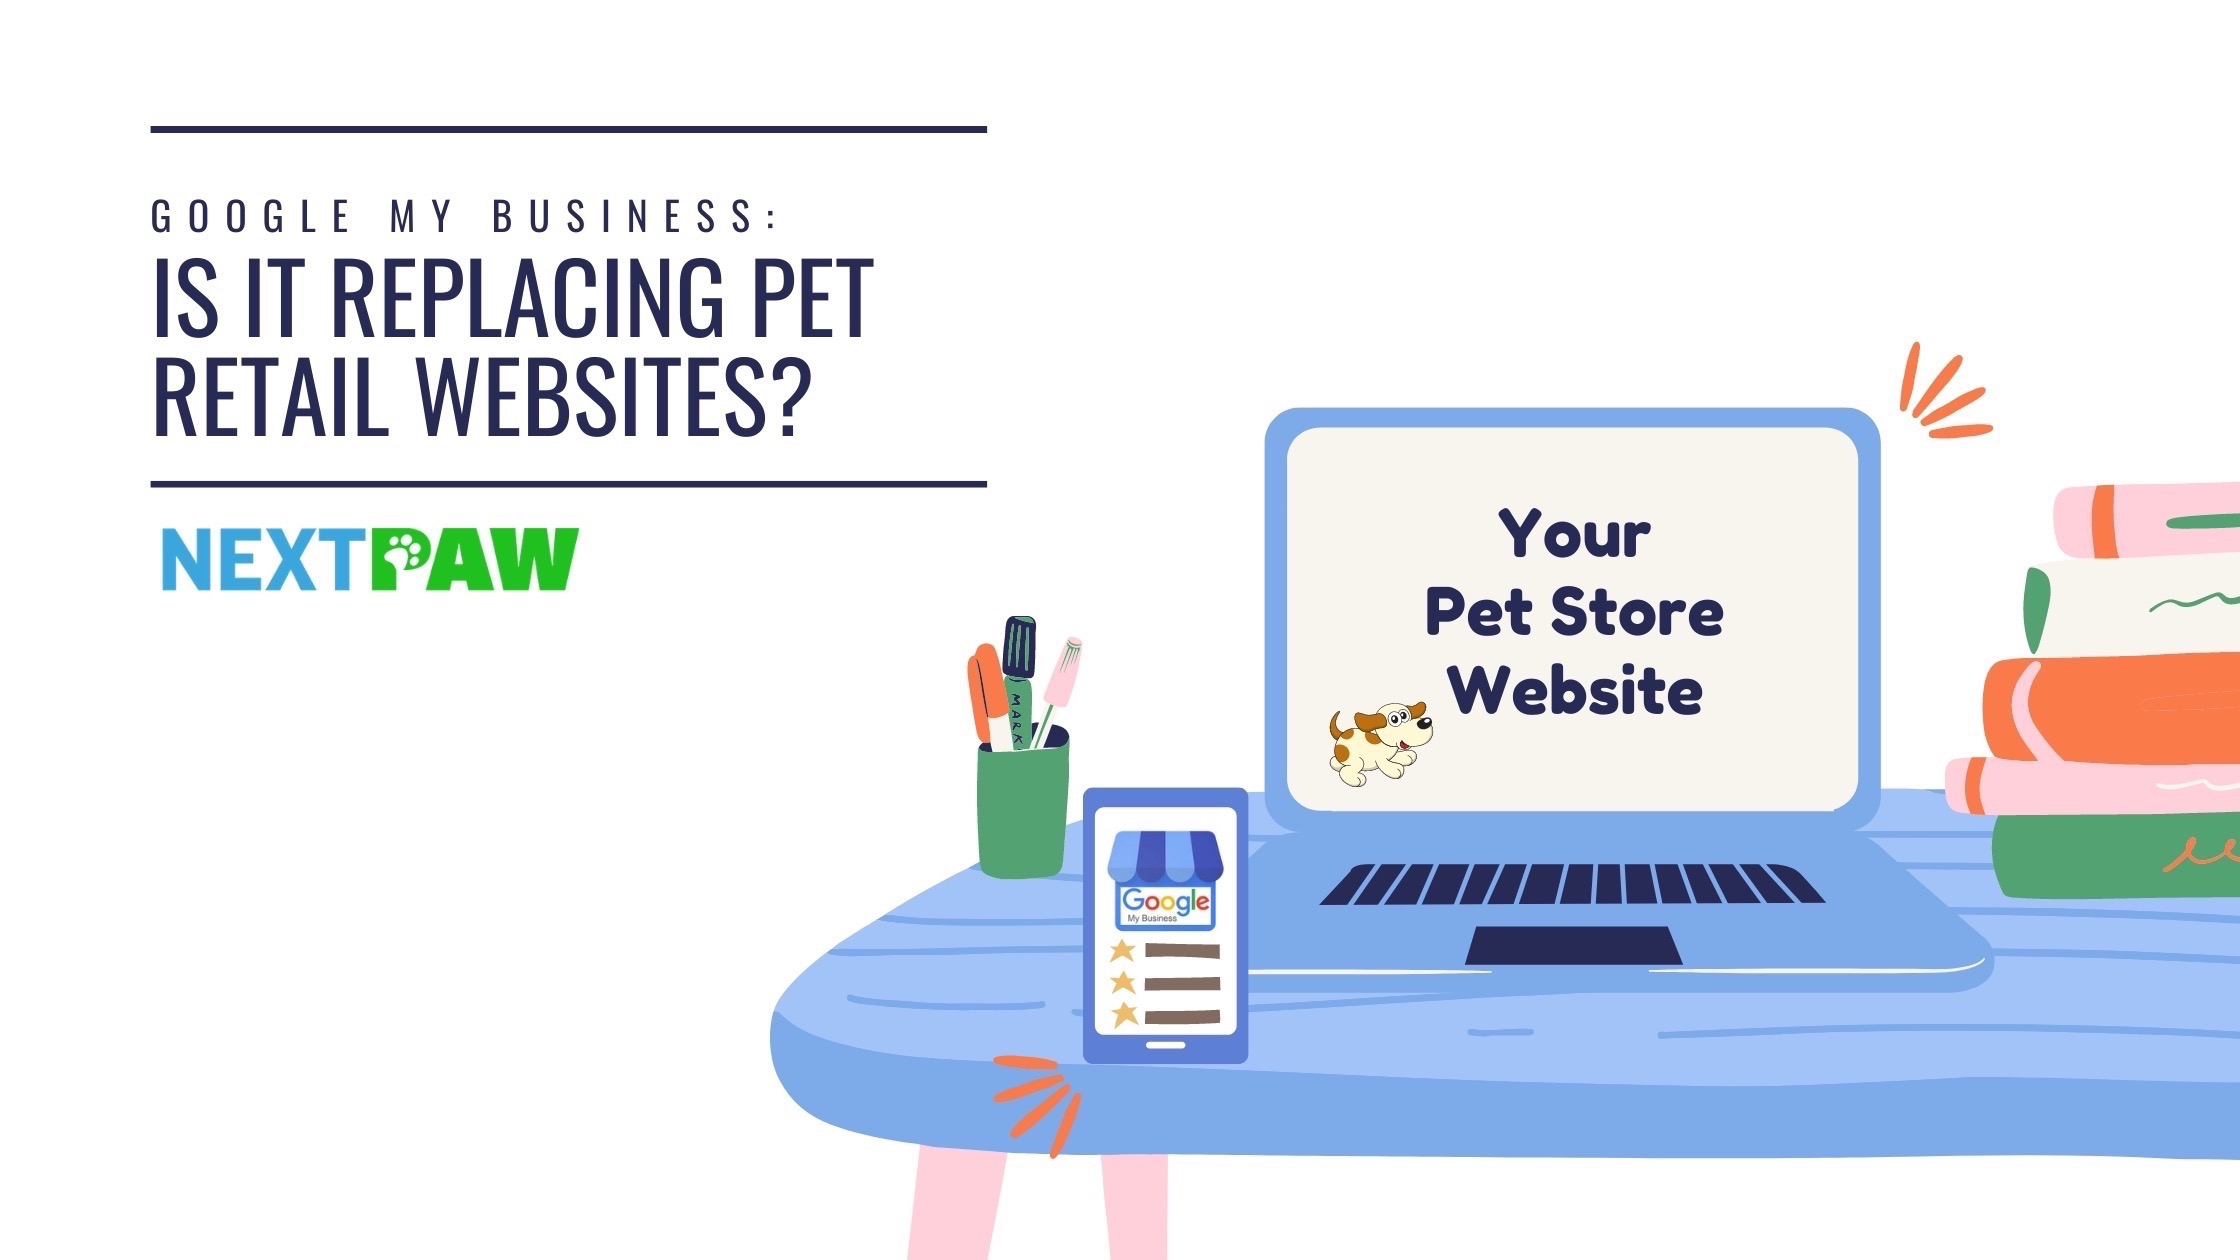 Laptop With Pet Store Website & Mobile With Google My Business on Table